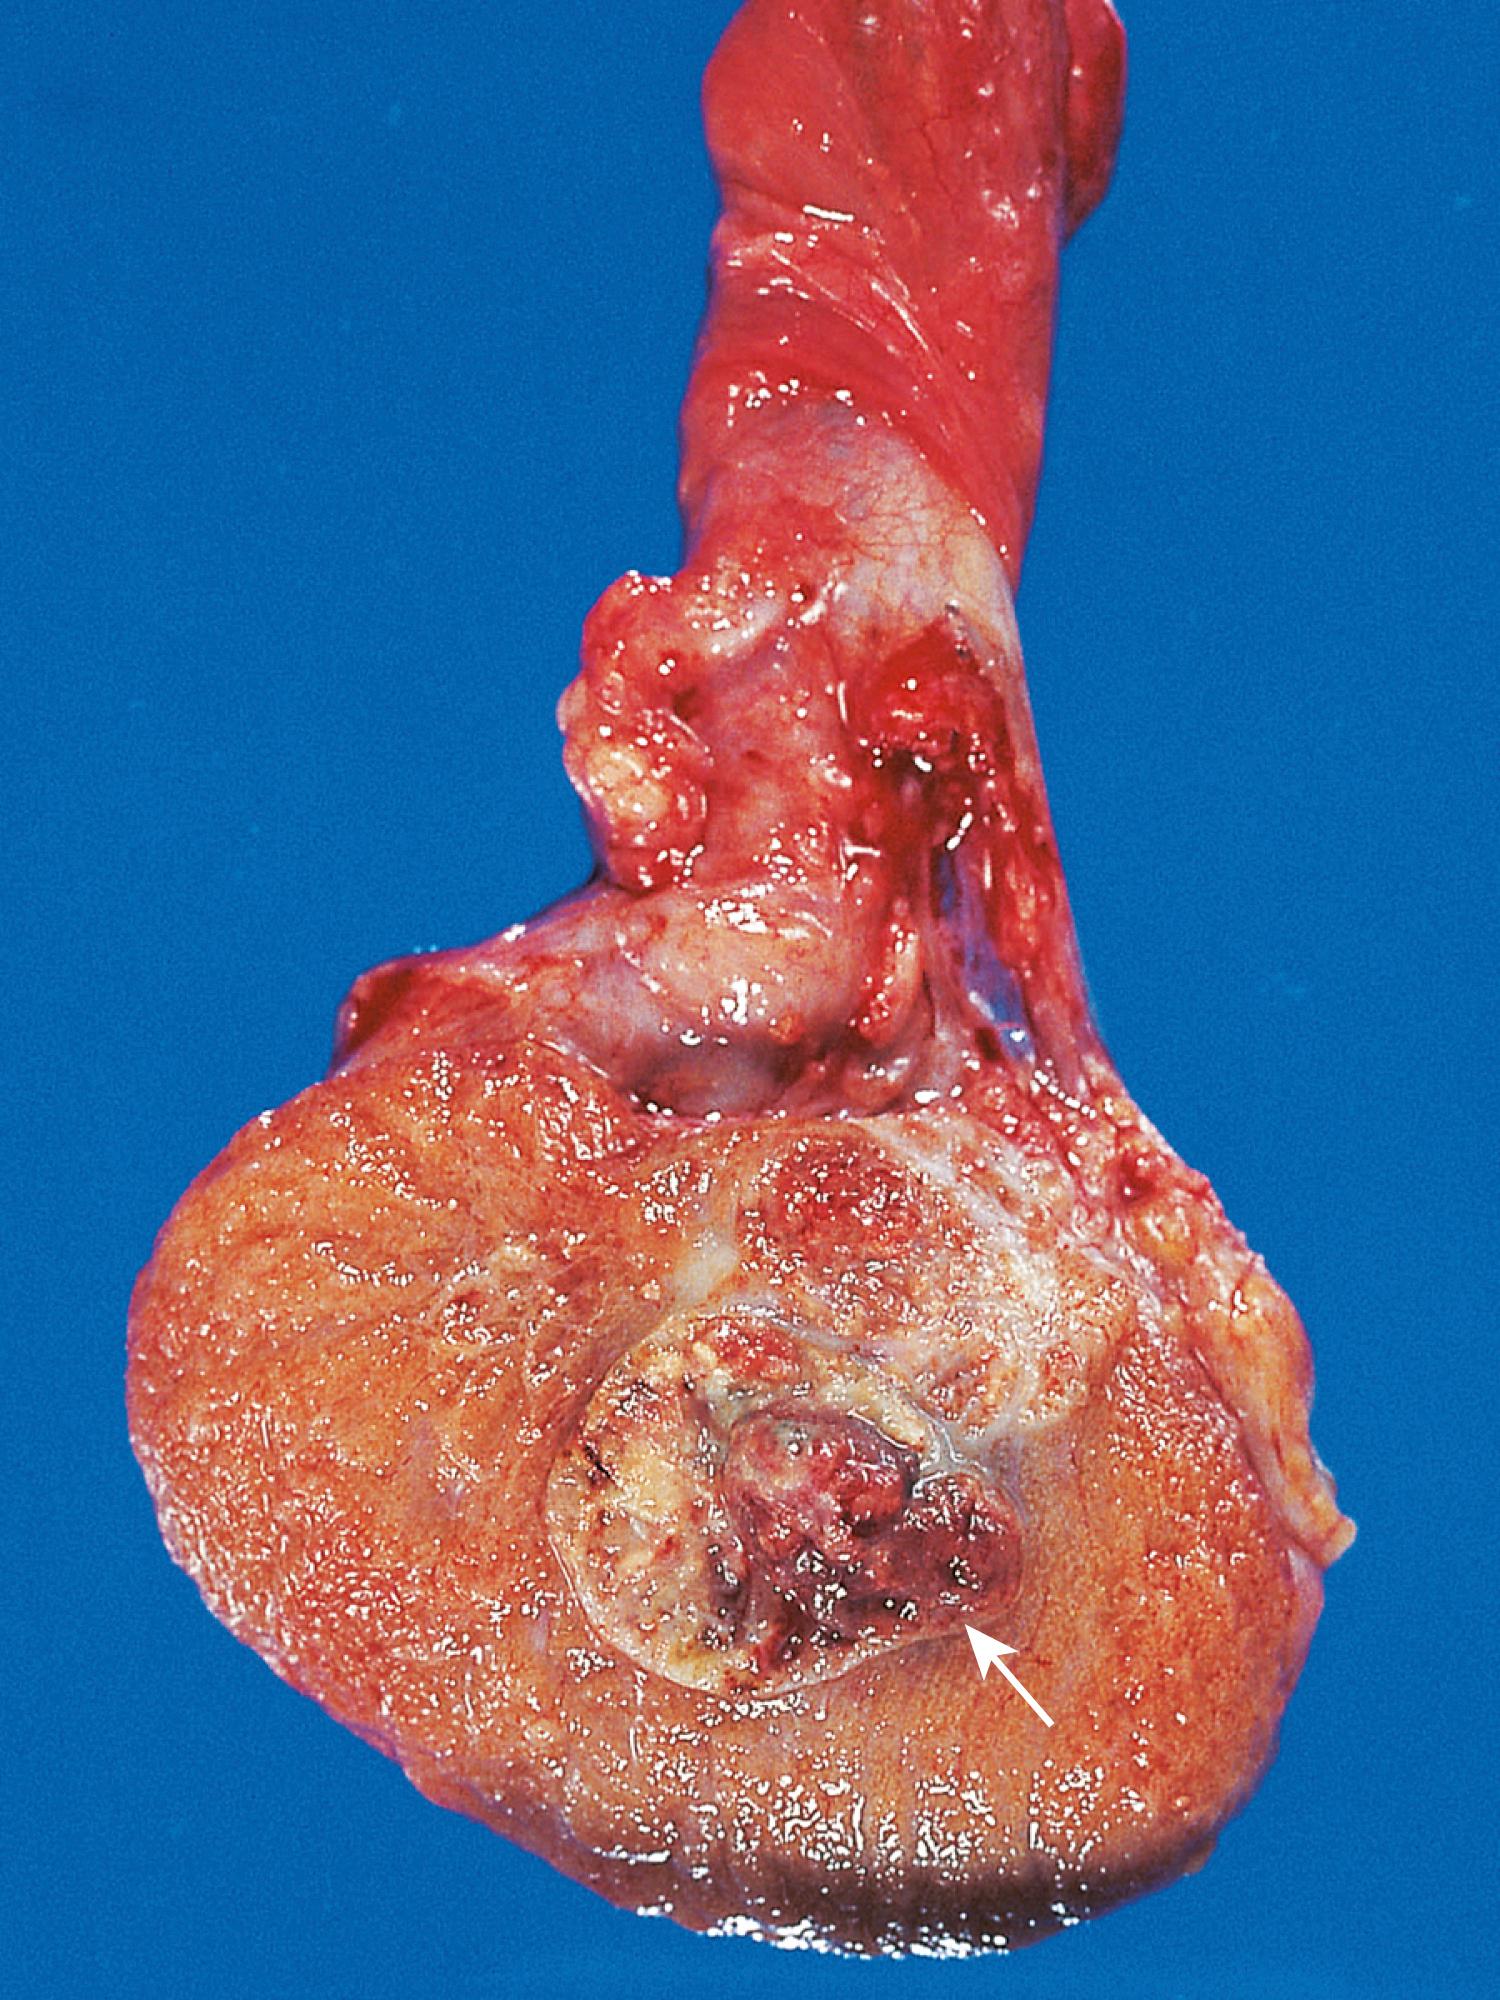 FIG. 16.5, Embryonal carcinoma. In contrast with the seminoma in Fig. 16.3, this tumor is hemorrhagic (arrow) .